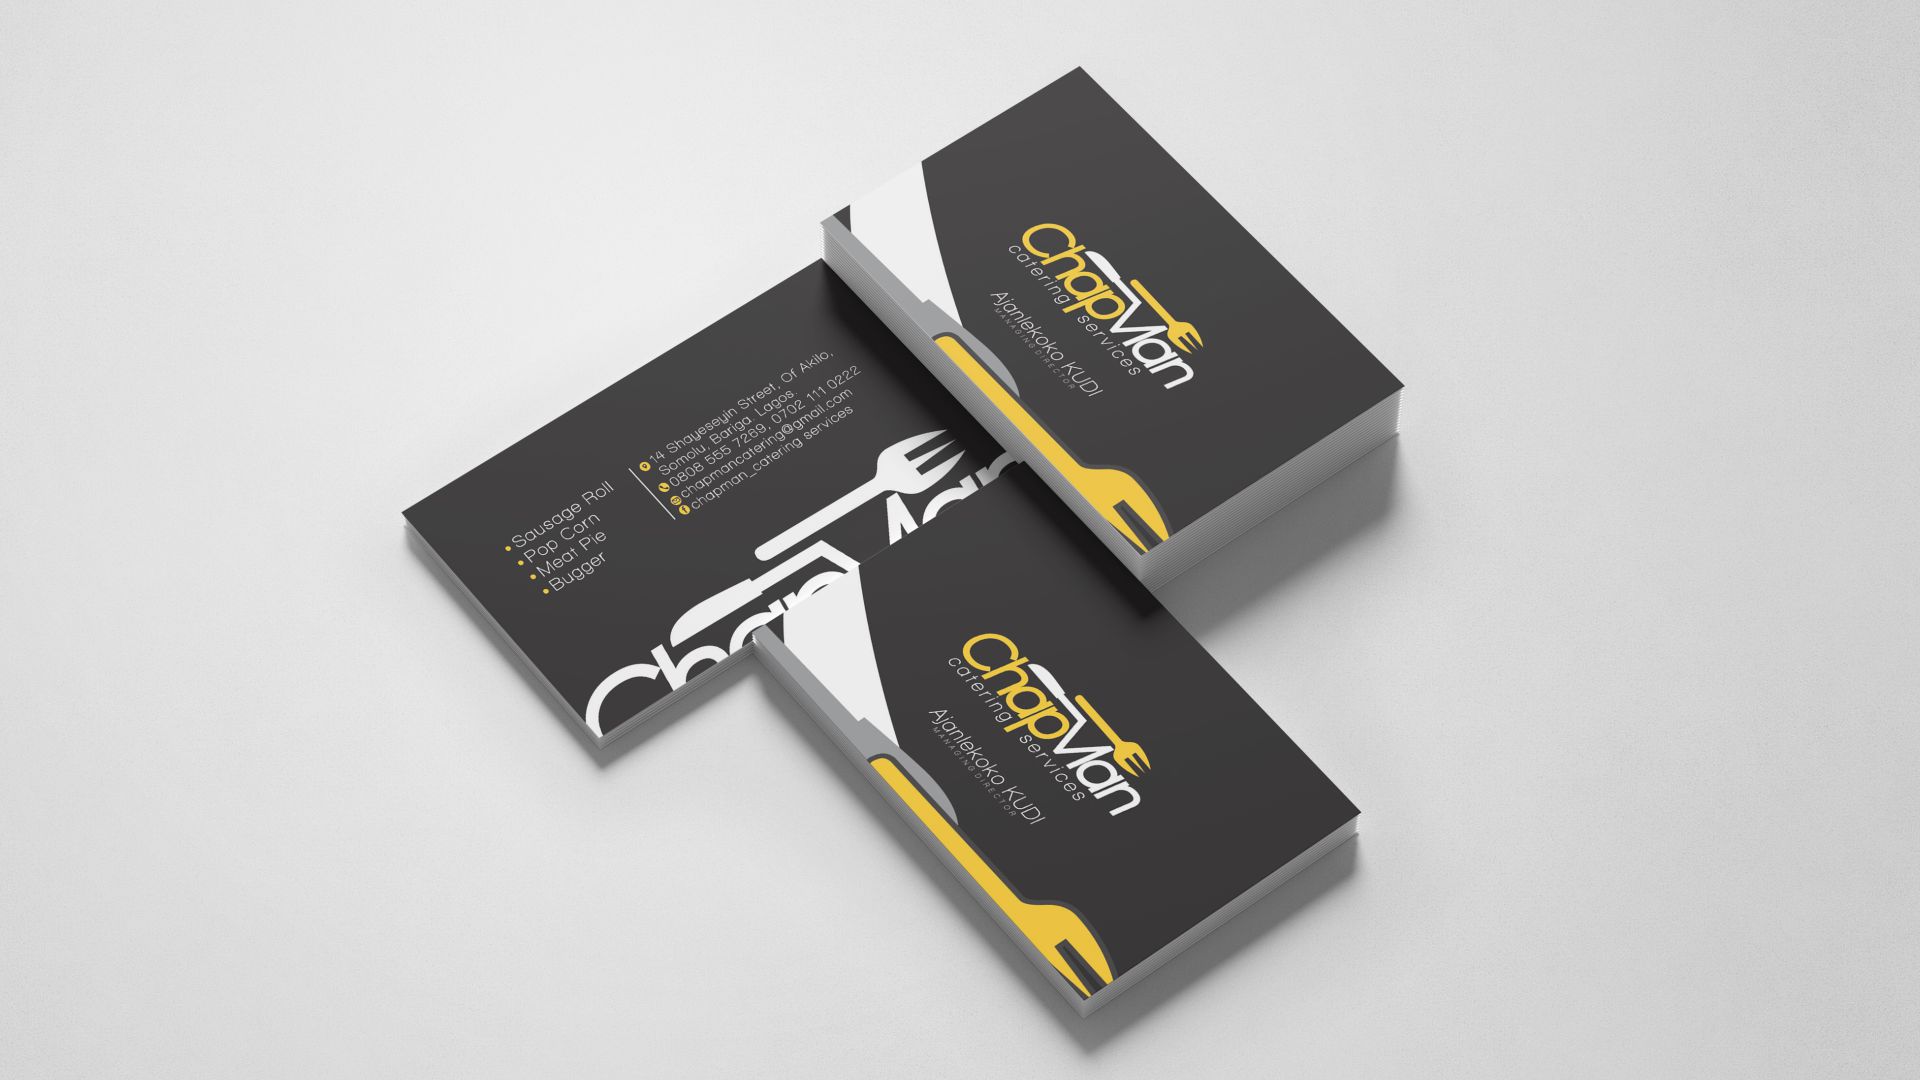 Business Card design and printing in Lagos Nigeria